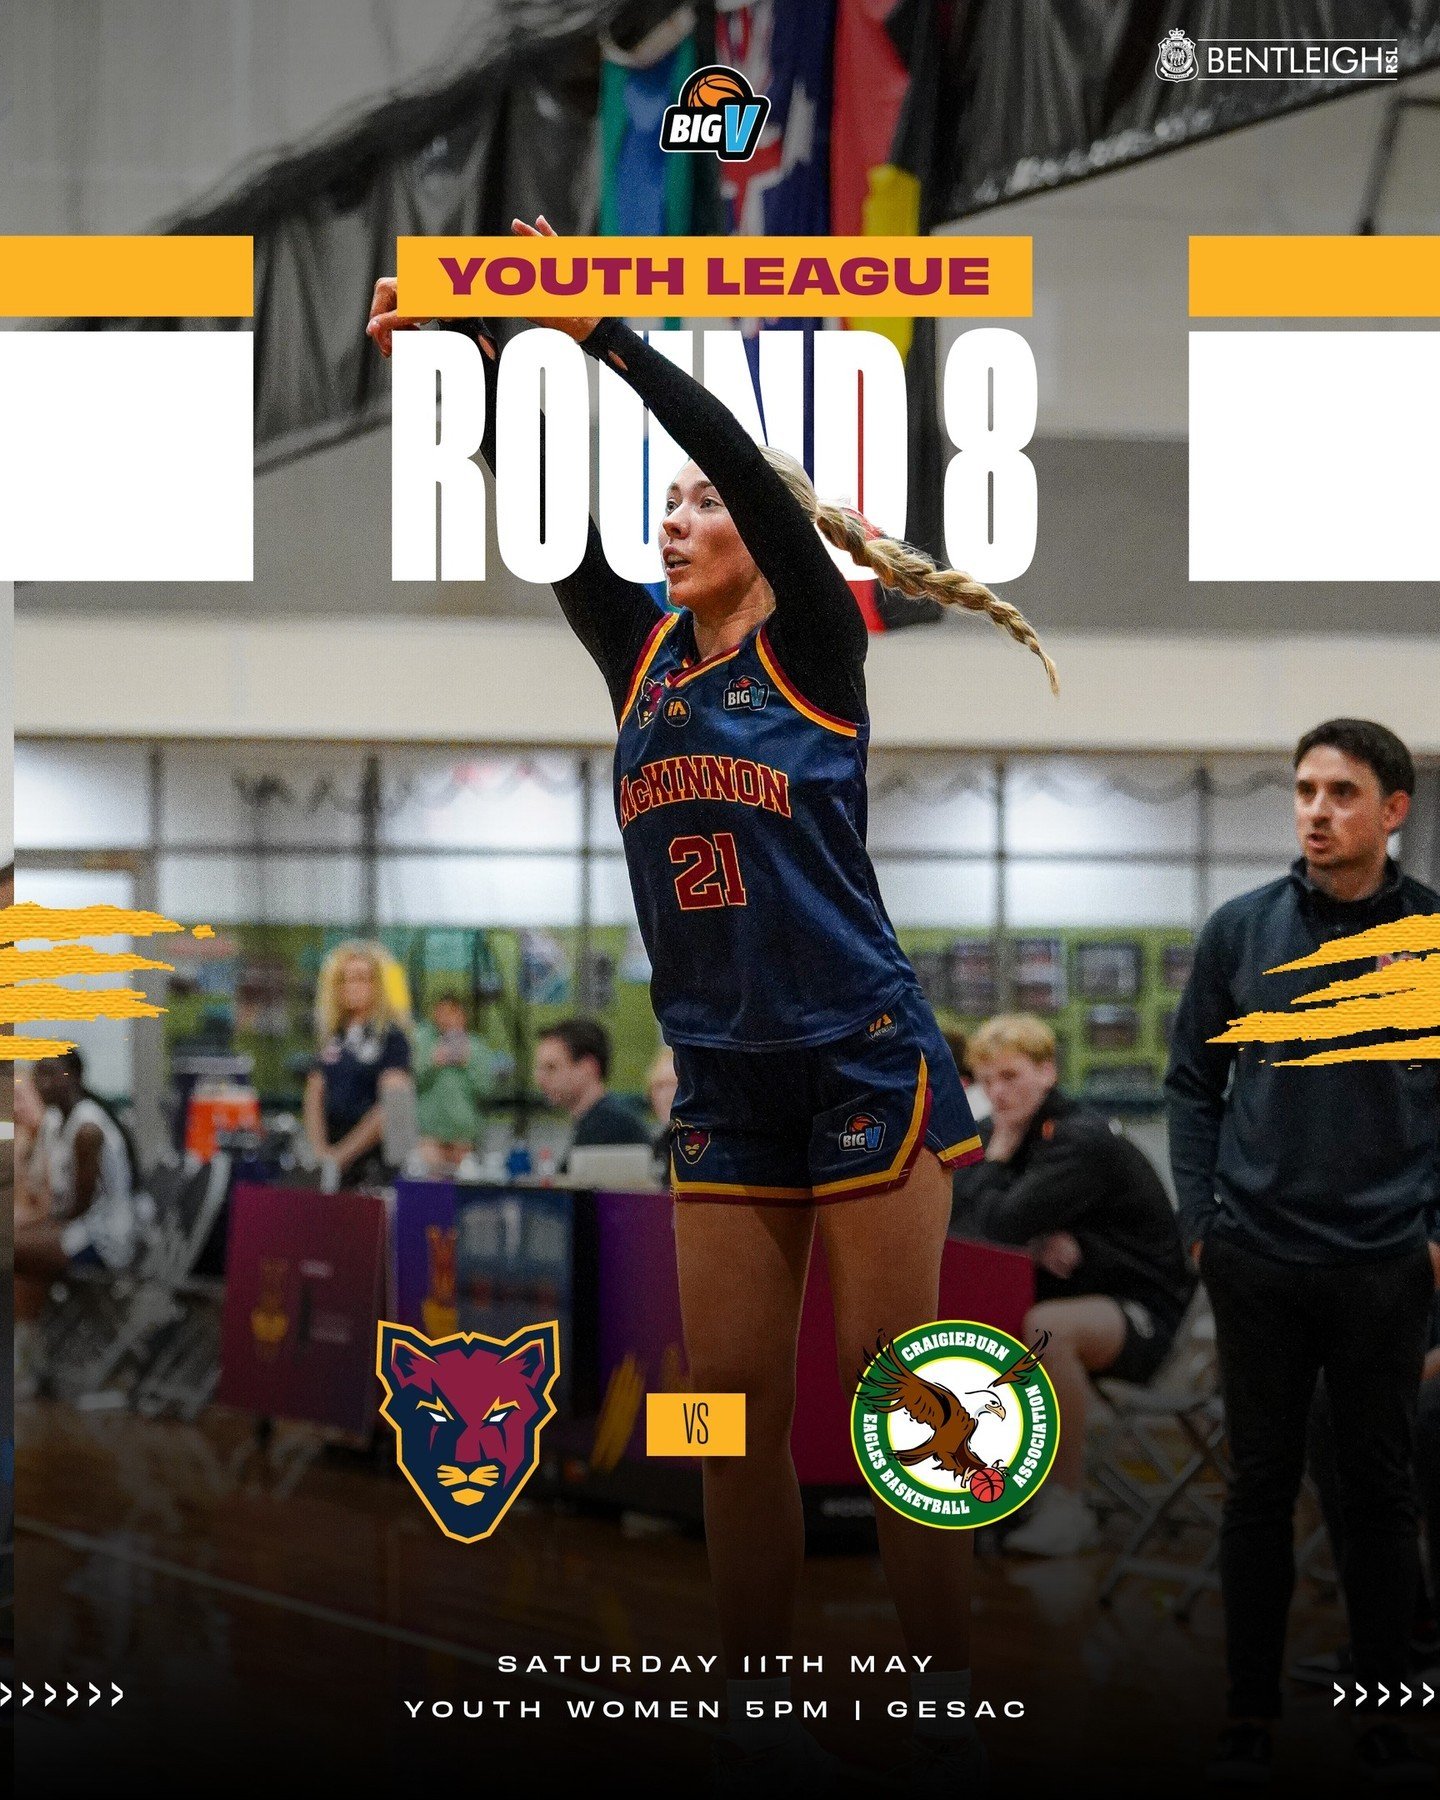 Big V Championship and Youth League⁠
⁠
Join us this weekend as the Cougars look to #DefendTheDen for week 8 of the @bigv_ball season! ⁠
⁠
It all starts at 5pm as our Youth League Women look to keep their win streak alive and make it 7 in a row agains